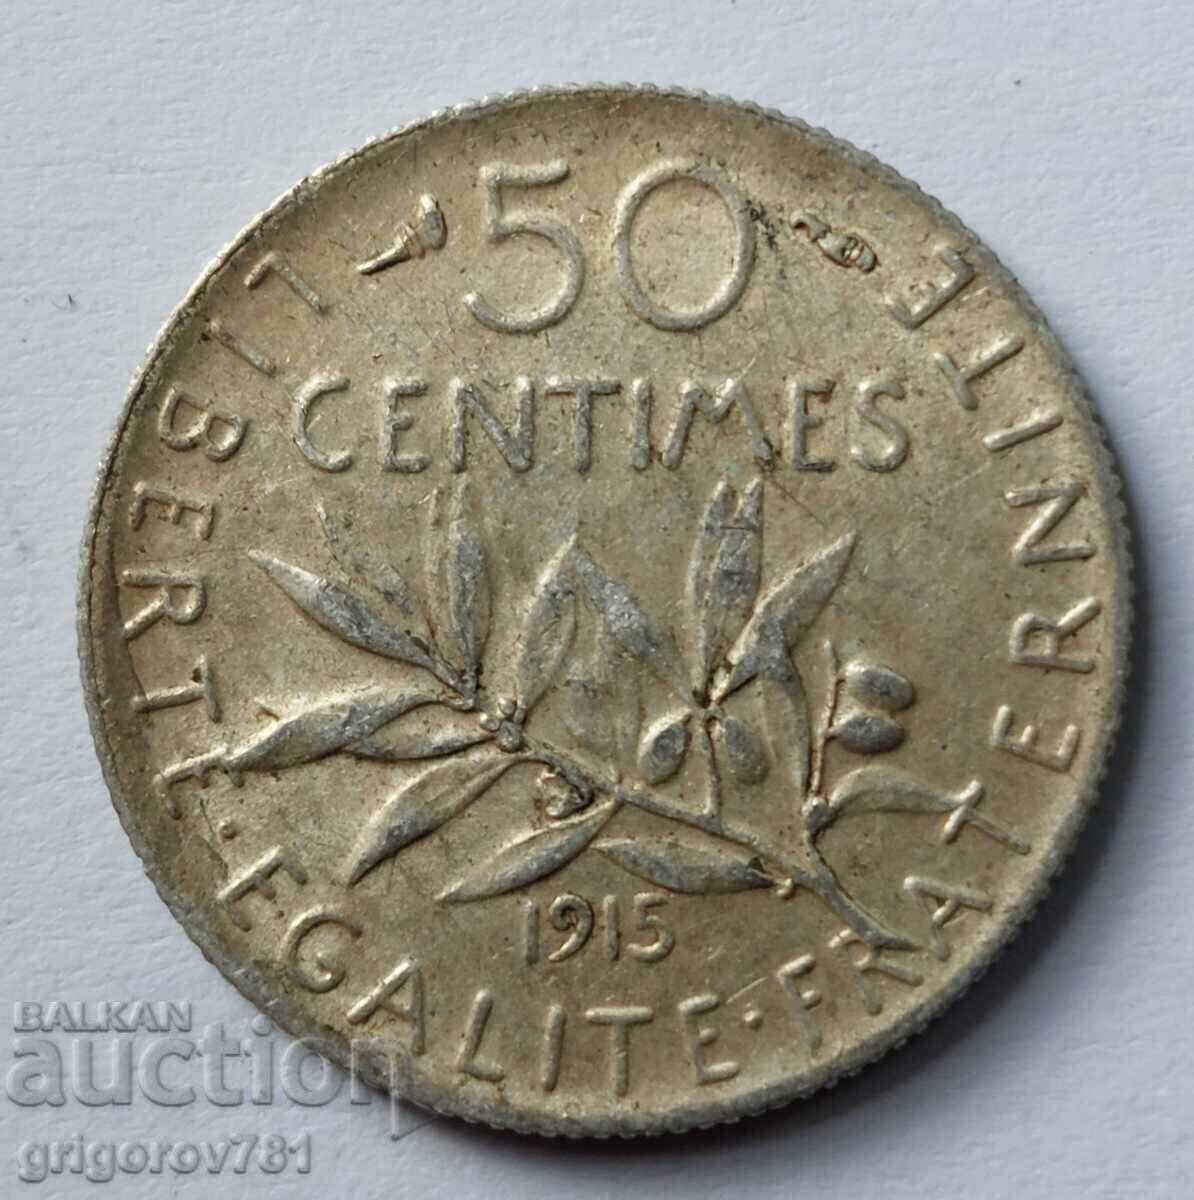 50 centimes silver France 1915 - silver coin №32